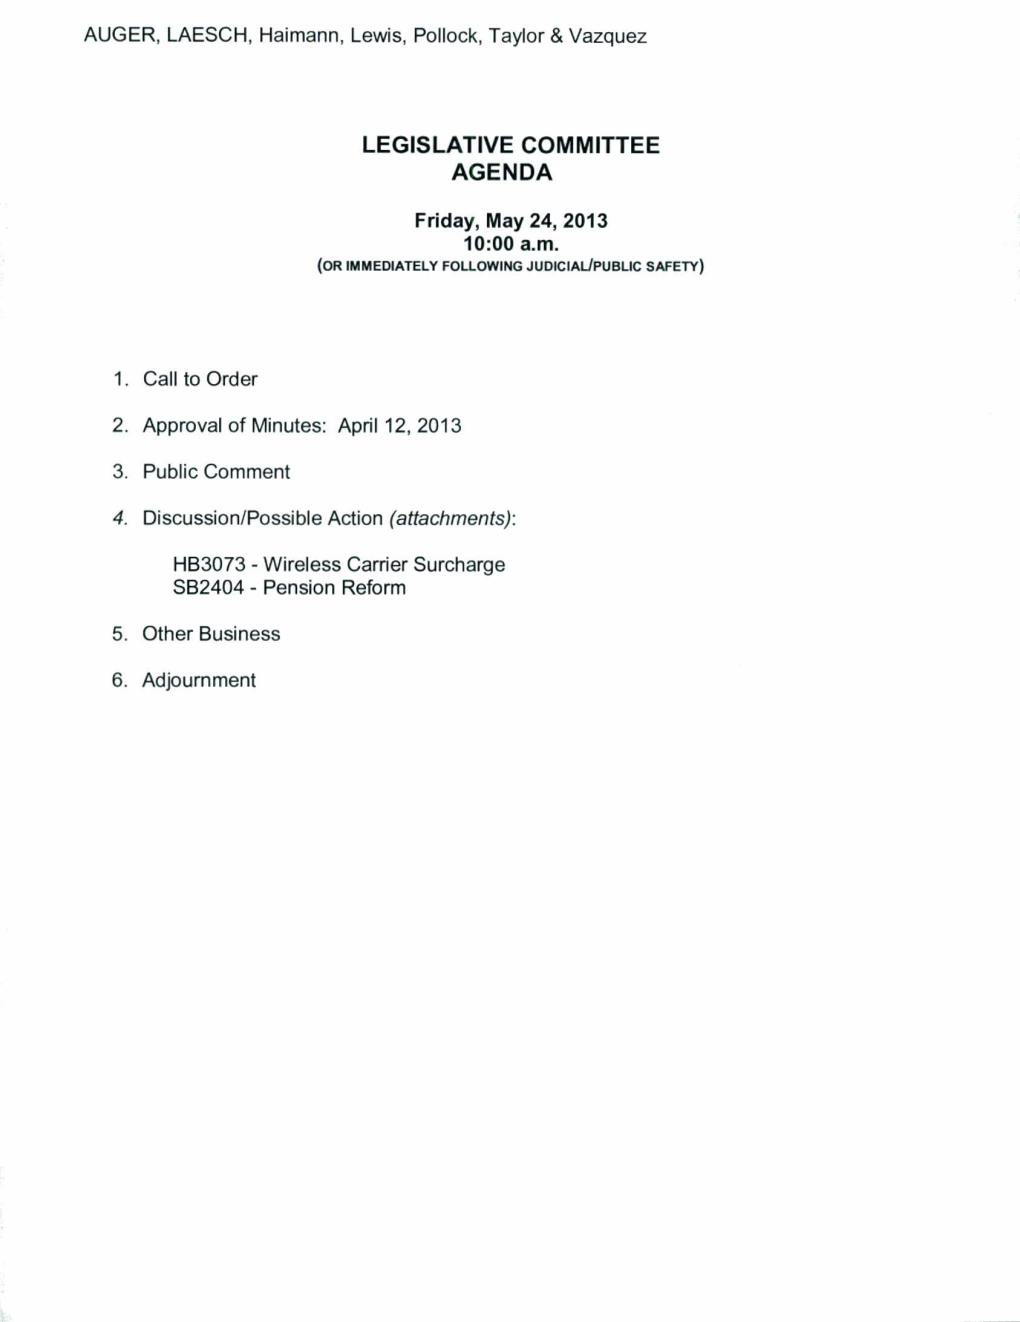 LEGISLATIVE COMMITTEE AGENDA Friday, May 24, 2013 10:00 A.M. (OR IMMEDIATELY FOLLOWING JUDICIAL/PUBLIC SAFETY)